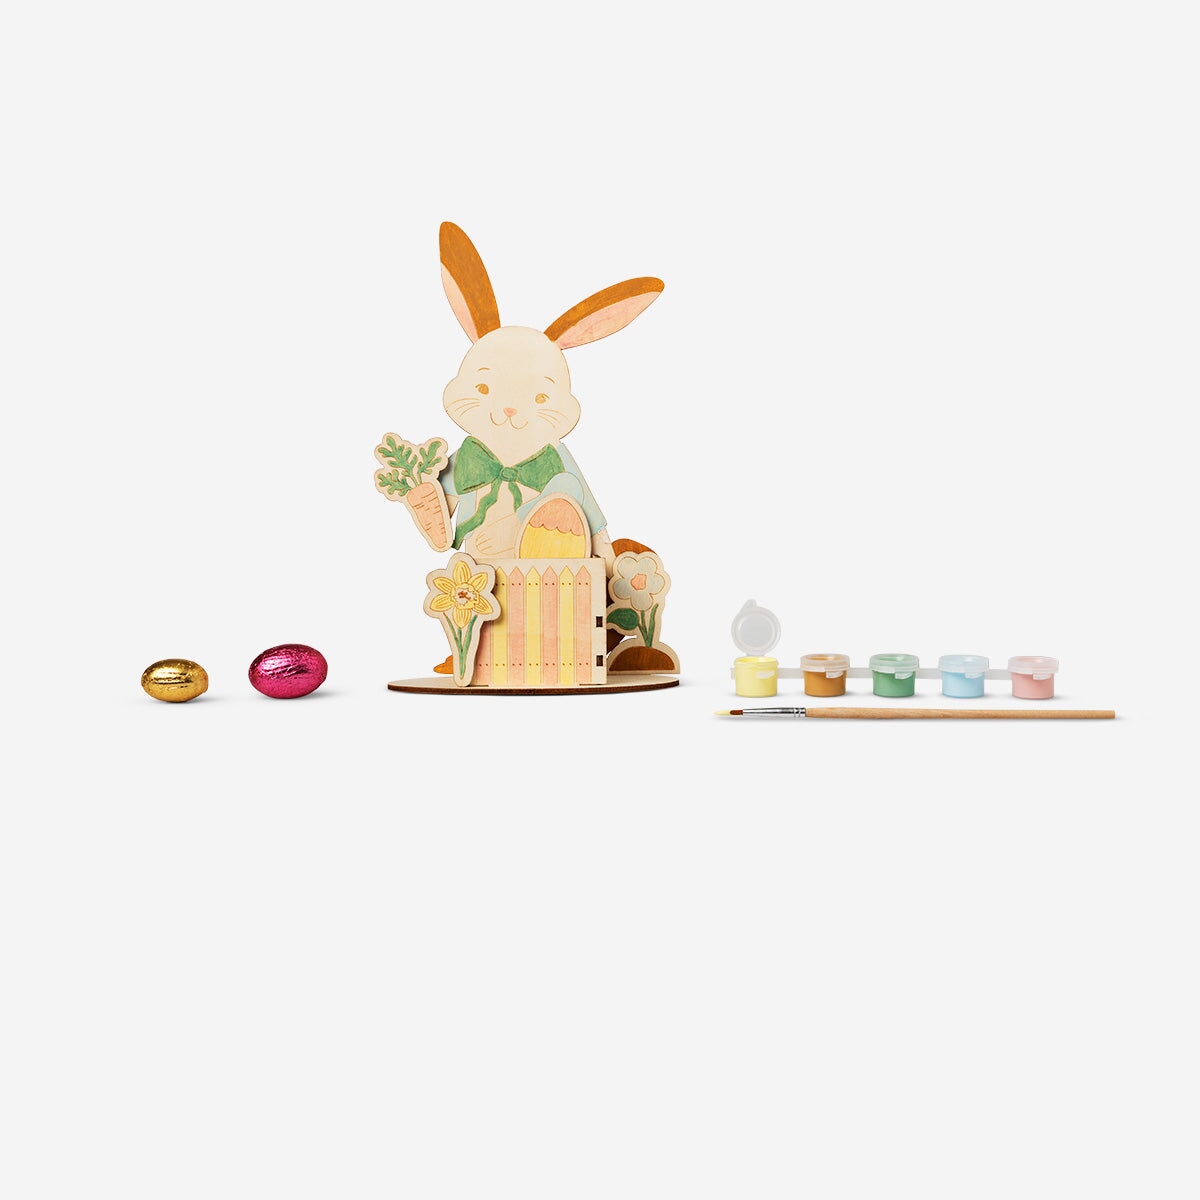 Paint-your-own Easter bunny decoration Hobby Flying Tiger Copenhagen 